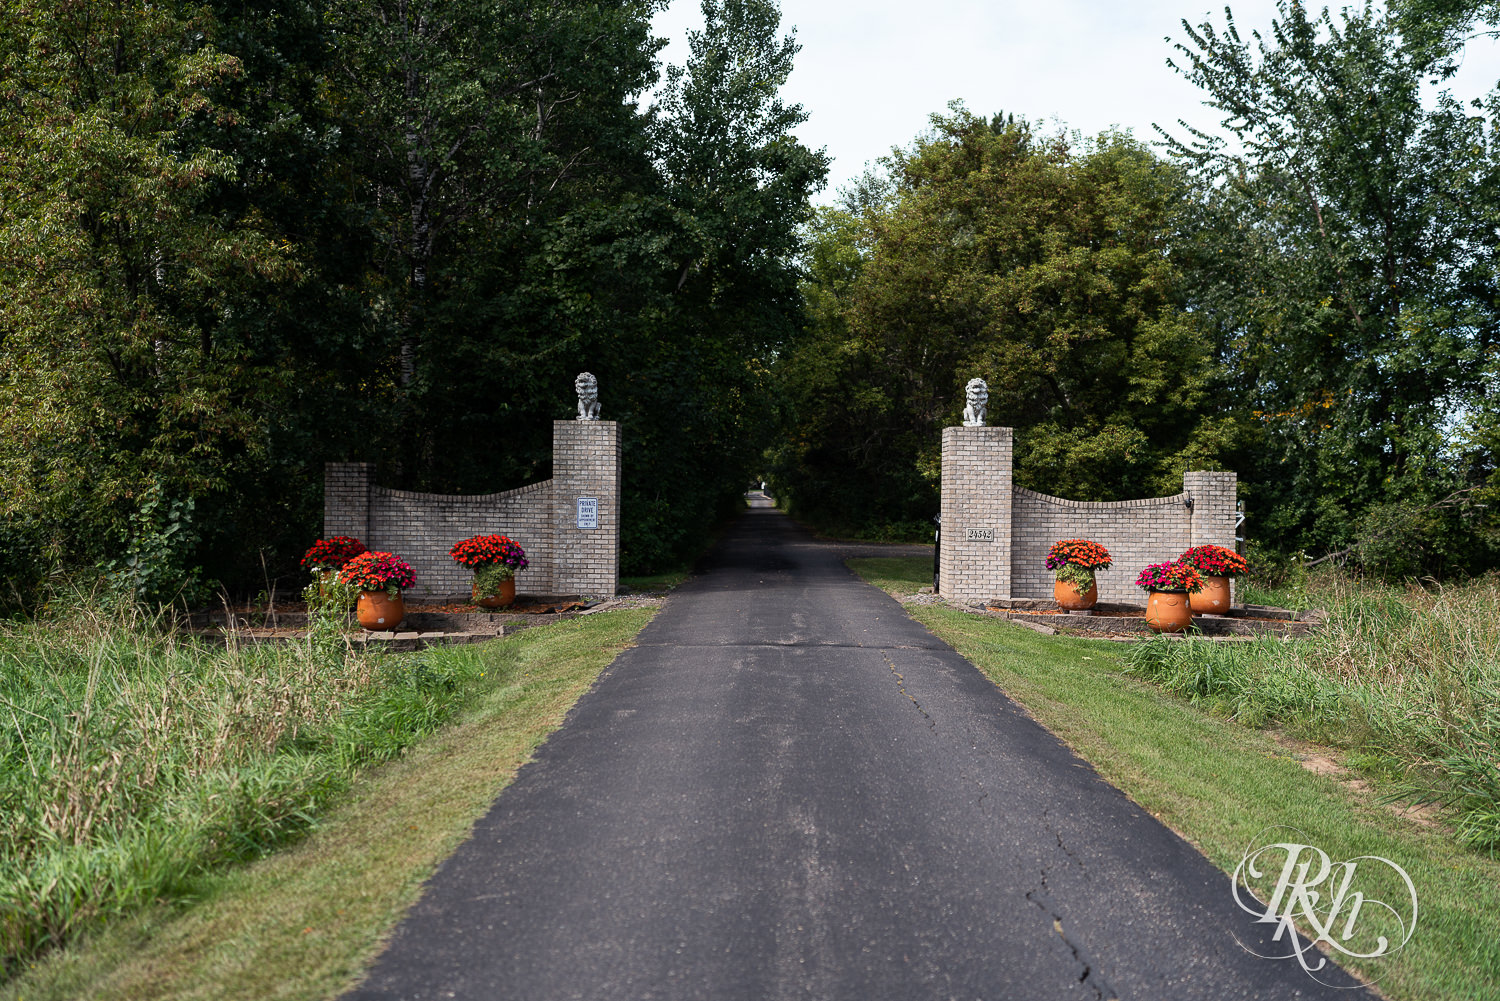 Entrance to Stone Lion Winery and Events